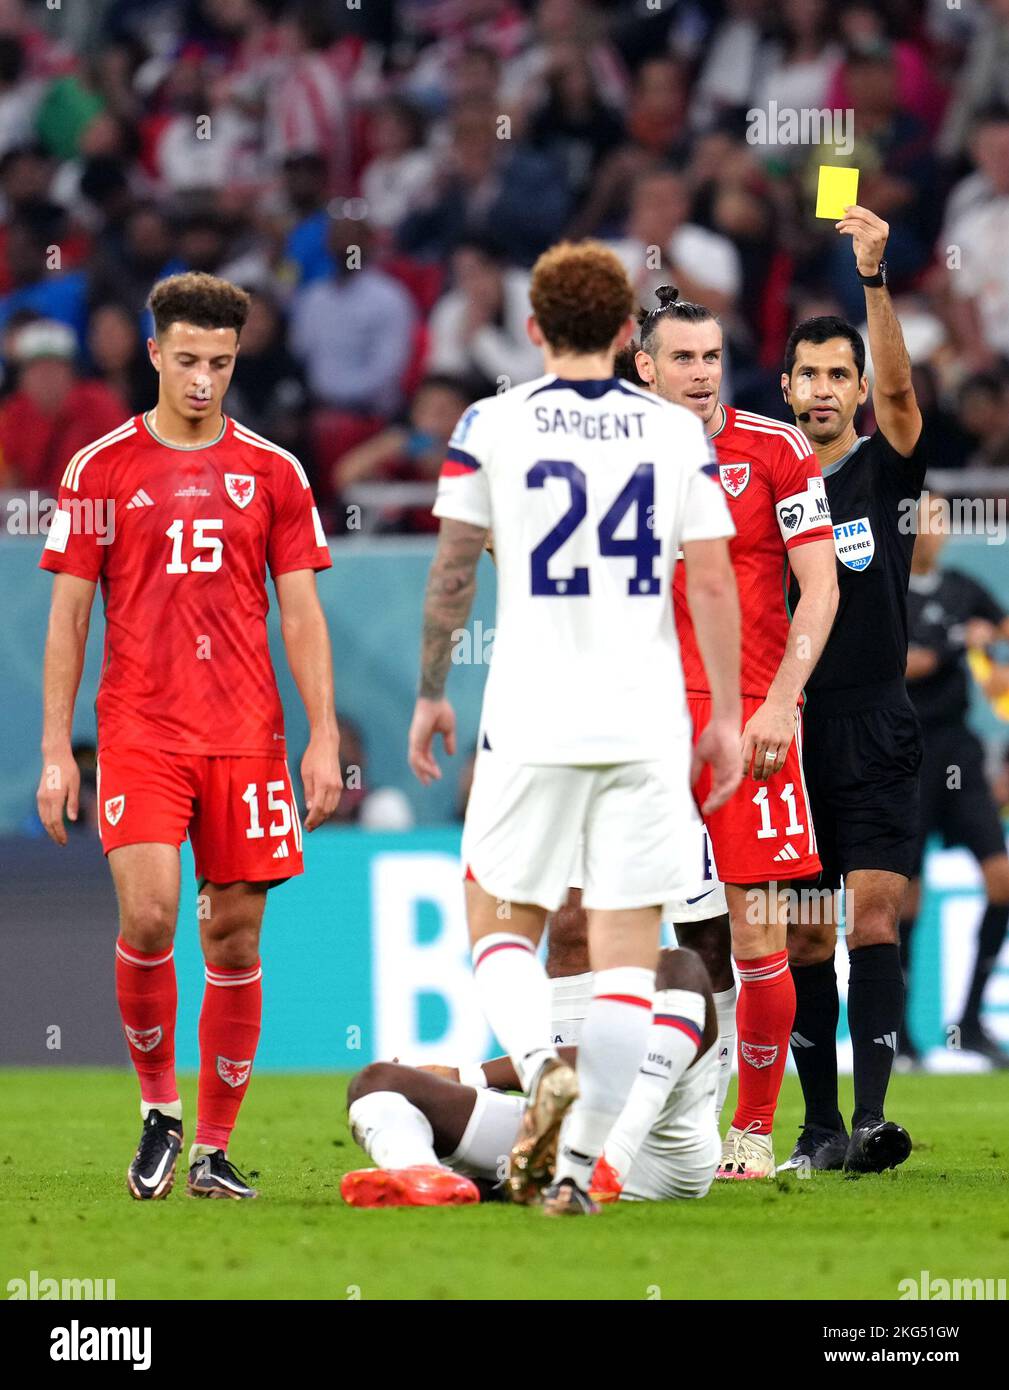 Wales' Gareth Bale is shown a yellow card by referee Abdulrahman Al-Jassim after a foul on USA's Yunus Musah during the FIFA World Cup Group B match at the Ahmad Bin Ali Stadium, Al-Rayyan. Picture date: Monday November 21, 2022. Stock Photo